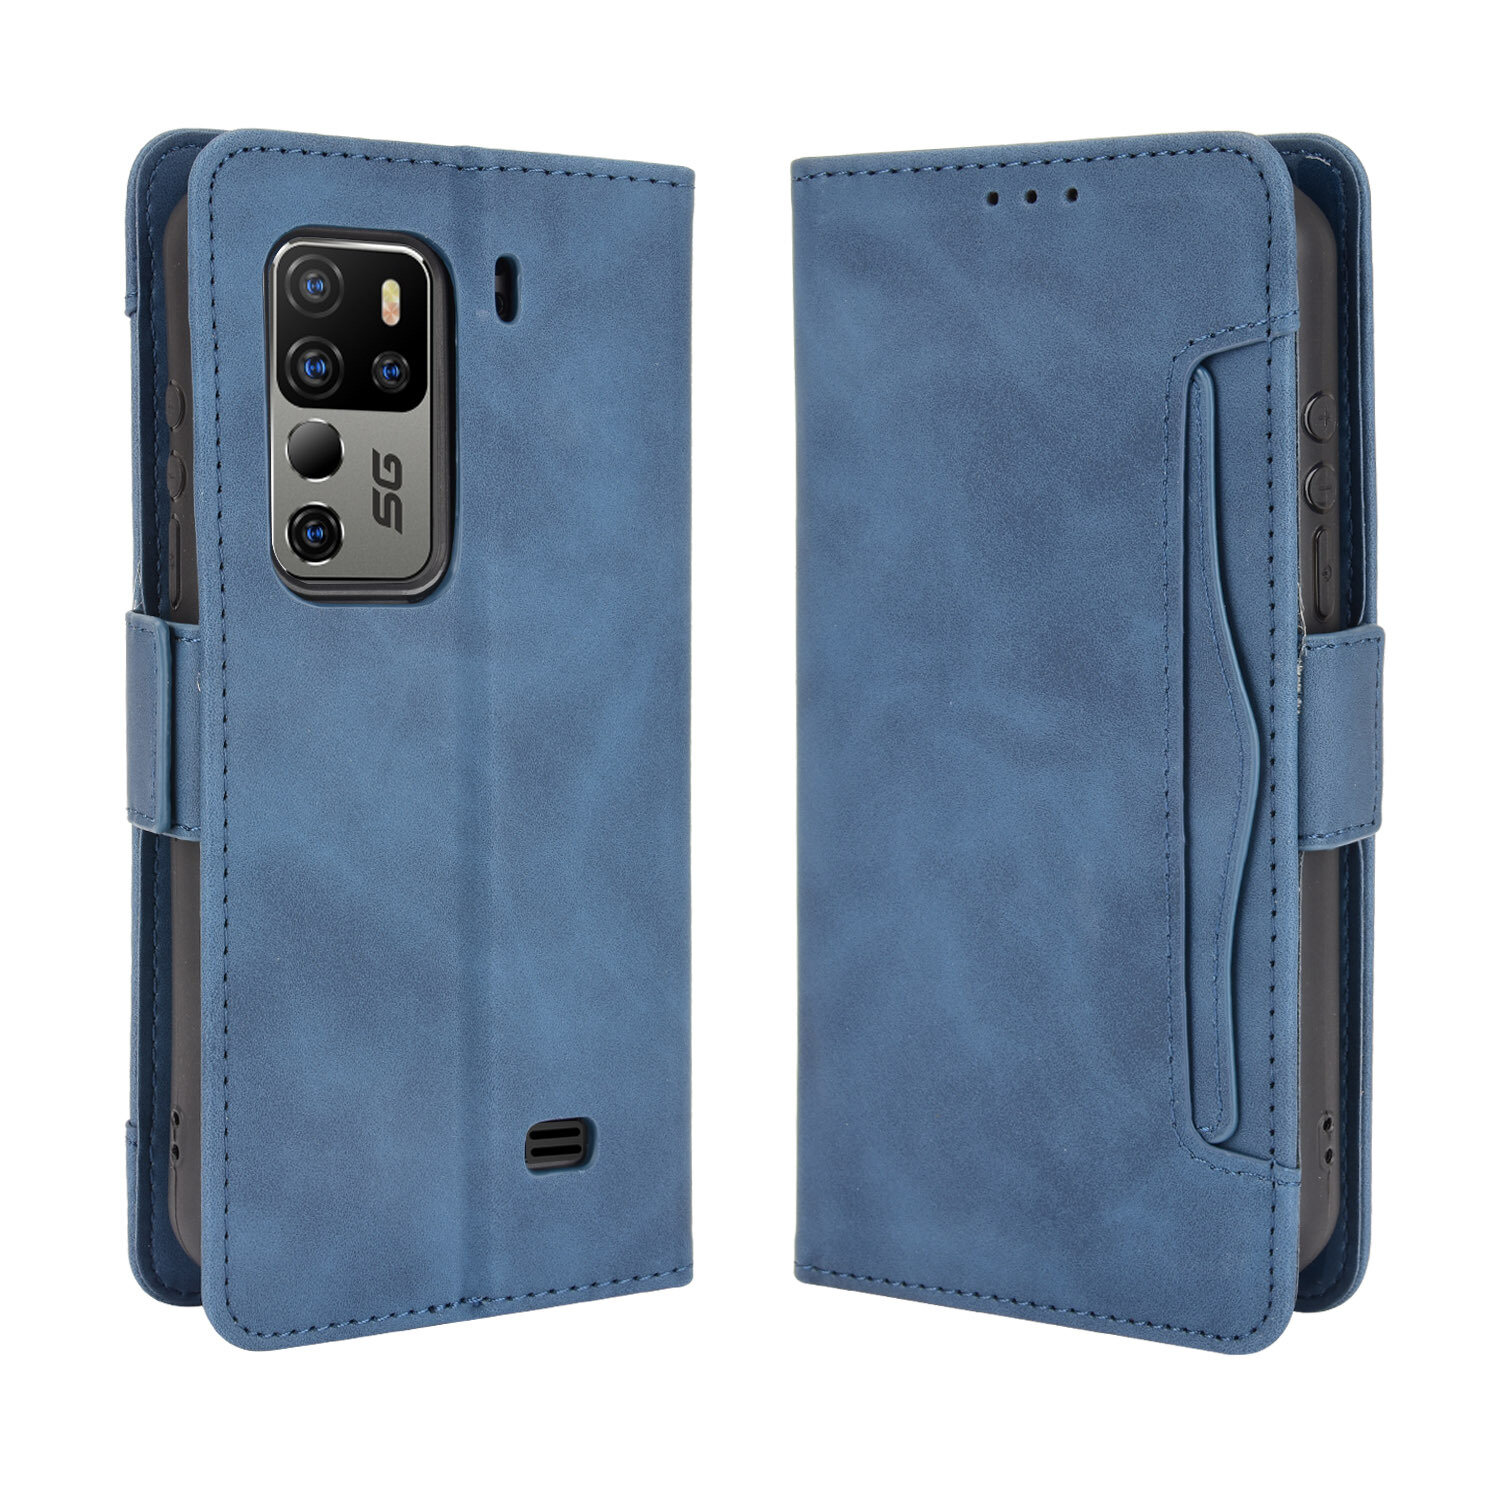 Bakeey for Ulefone Armor 11 5G/ Armor 11T 5G Case Magnetic Flip with Multiple Card Slot Wallet Folding Stand PU Leather